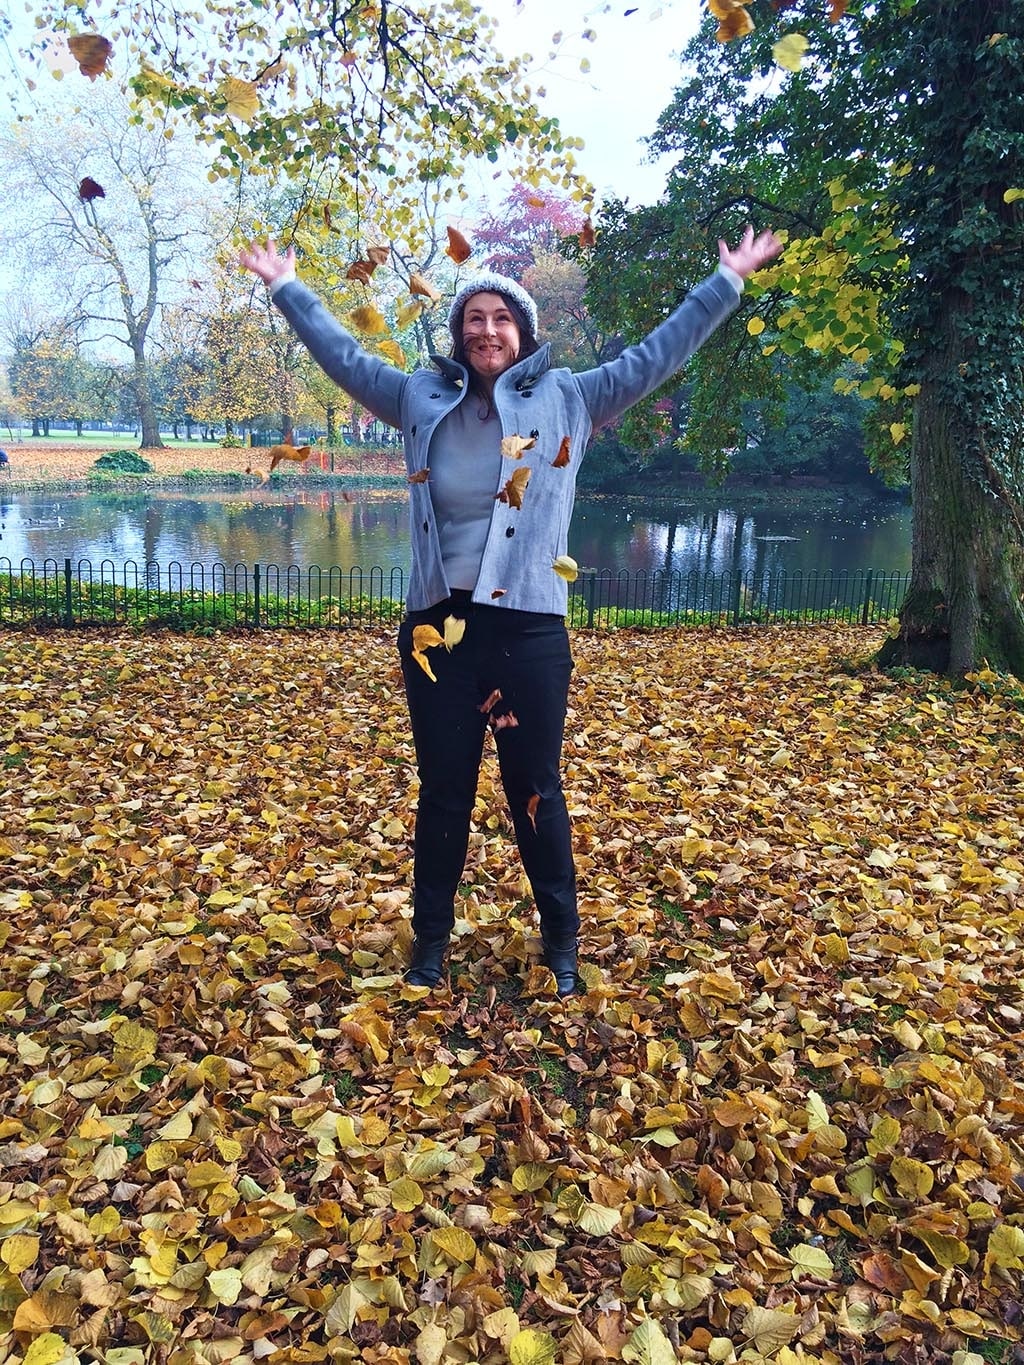 Dannii stood in a load of fallen leaves throwing some leaves in the air